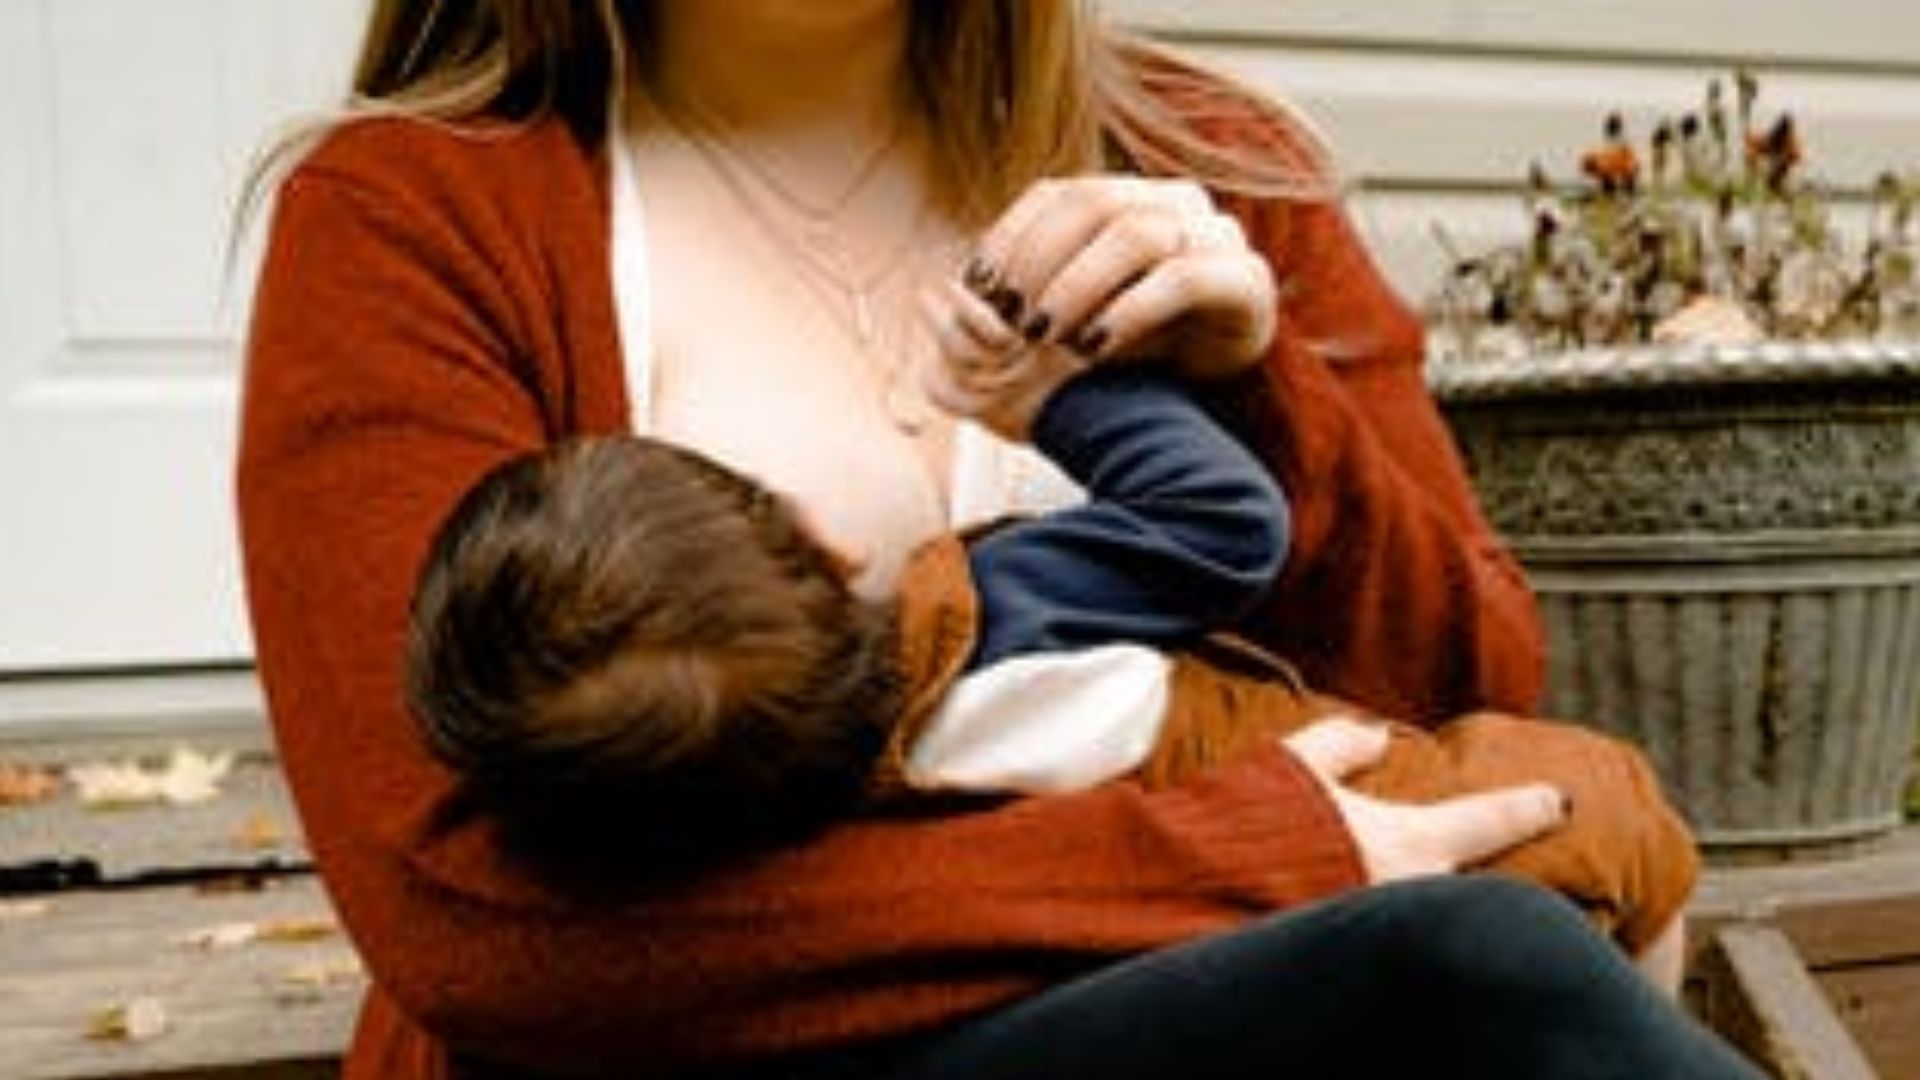 Not Being Able To Breastfeed Your Baby Shouldn’t Make You Anxious! Here Are Some Expert-Suggested Safe Alternatives